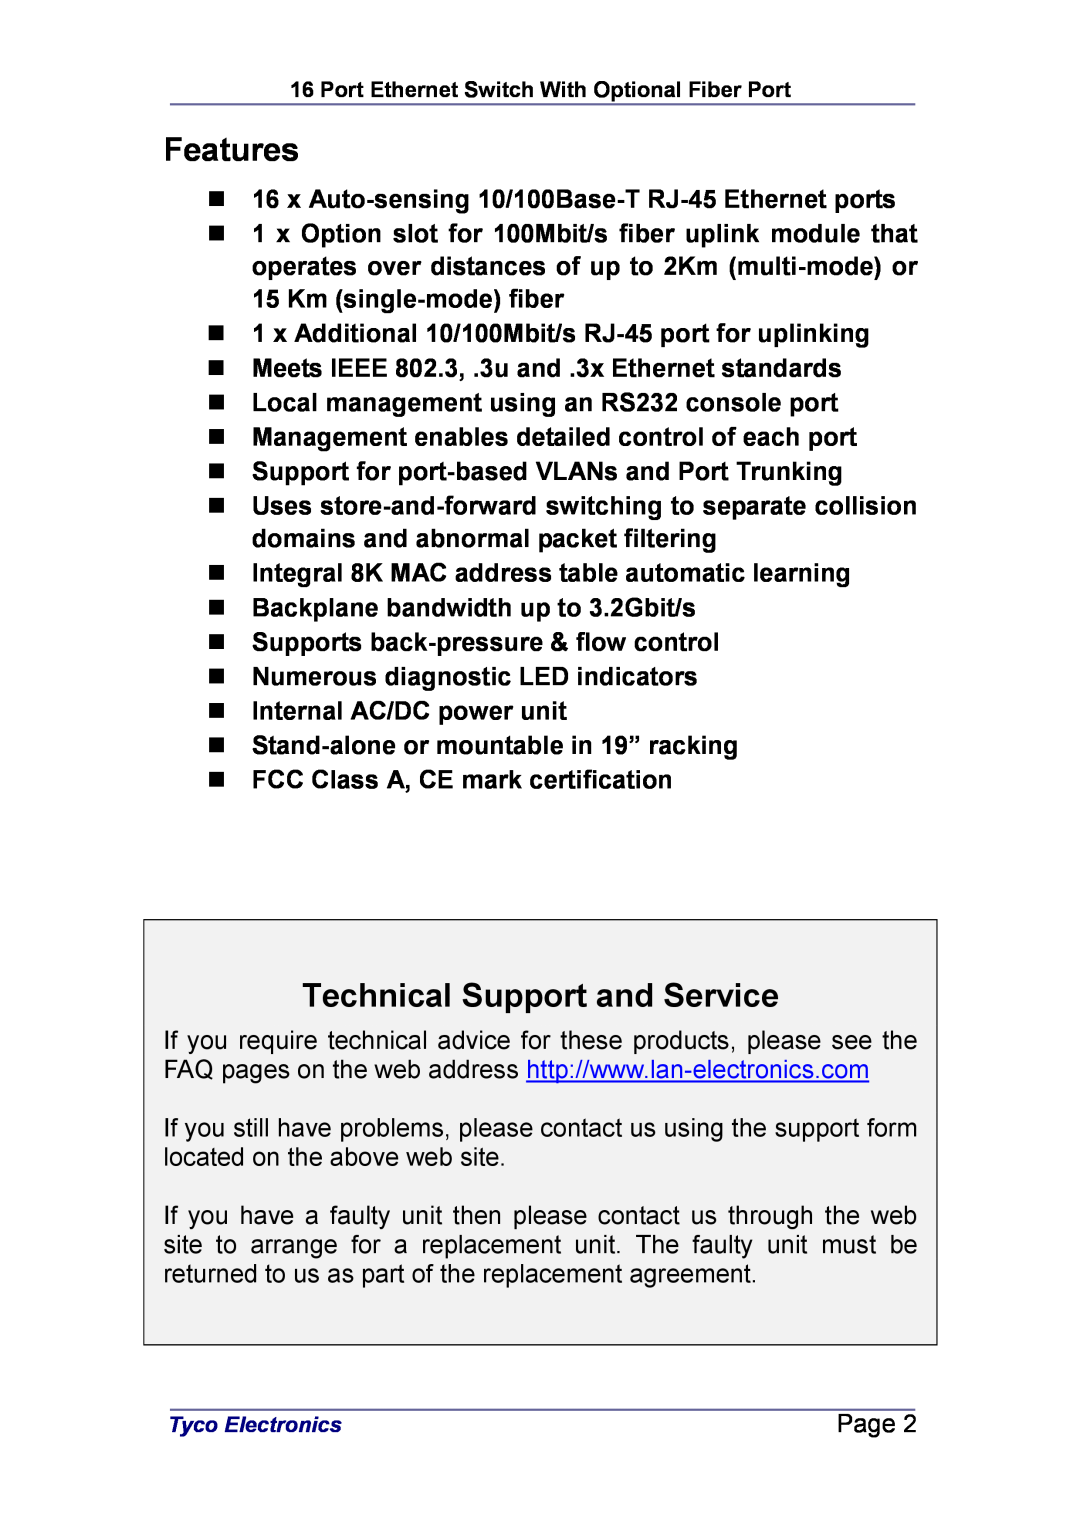 Tyco Electronics 0-1591046-X manual Features, Technical Support and Service 